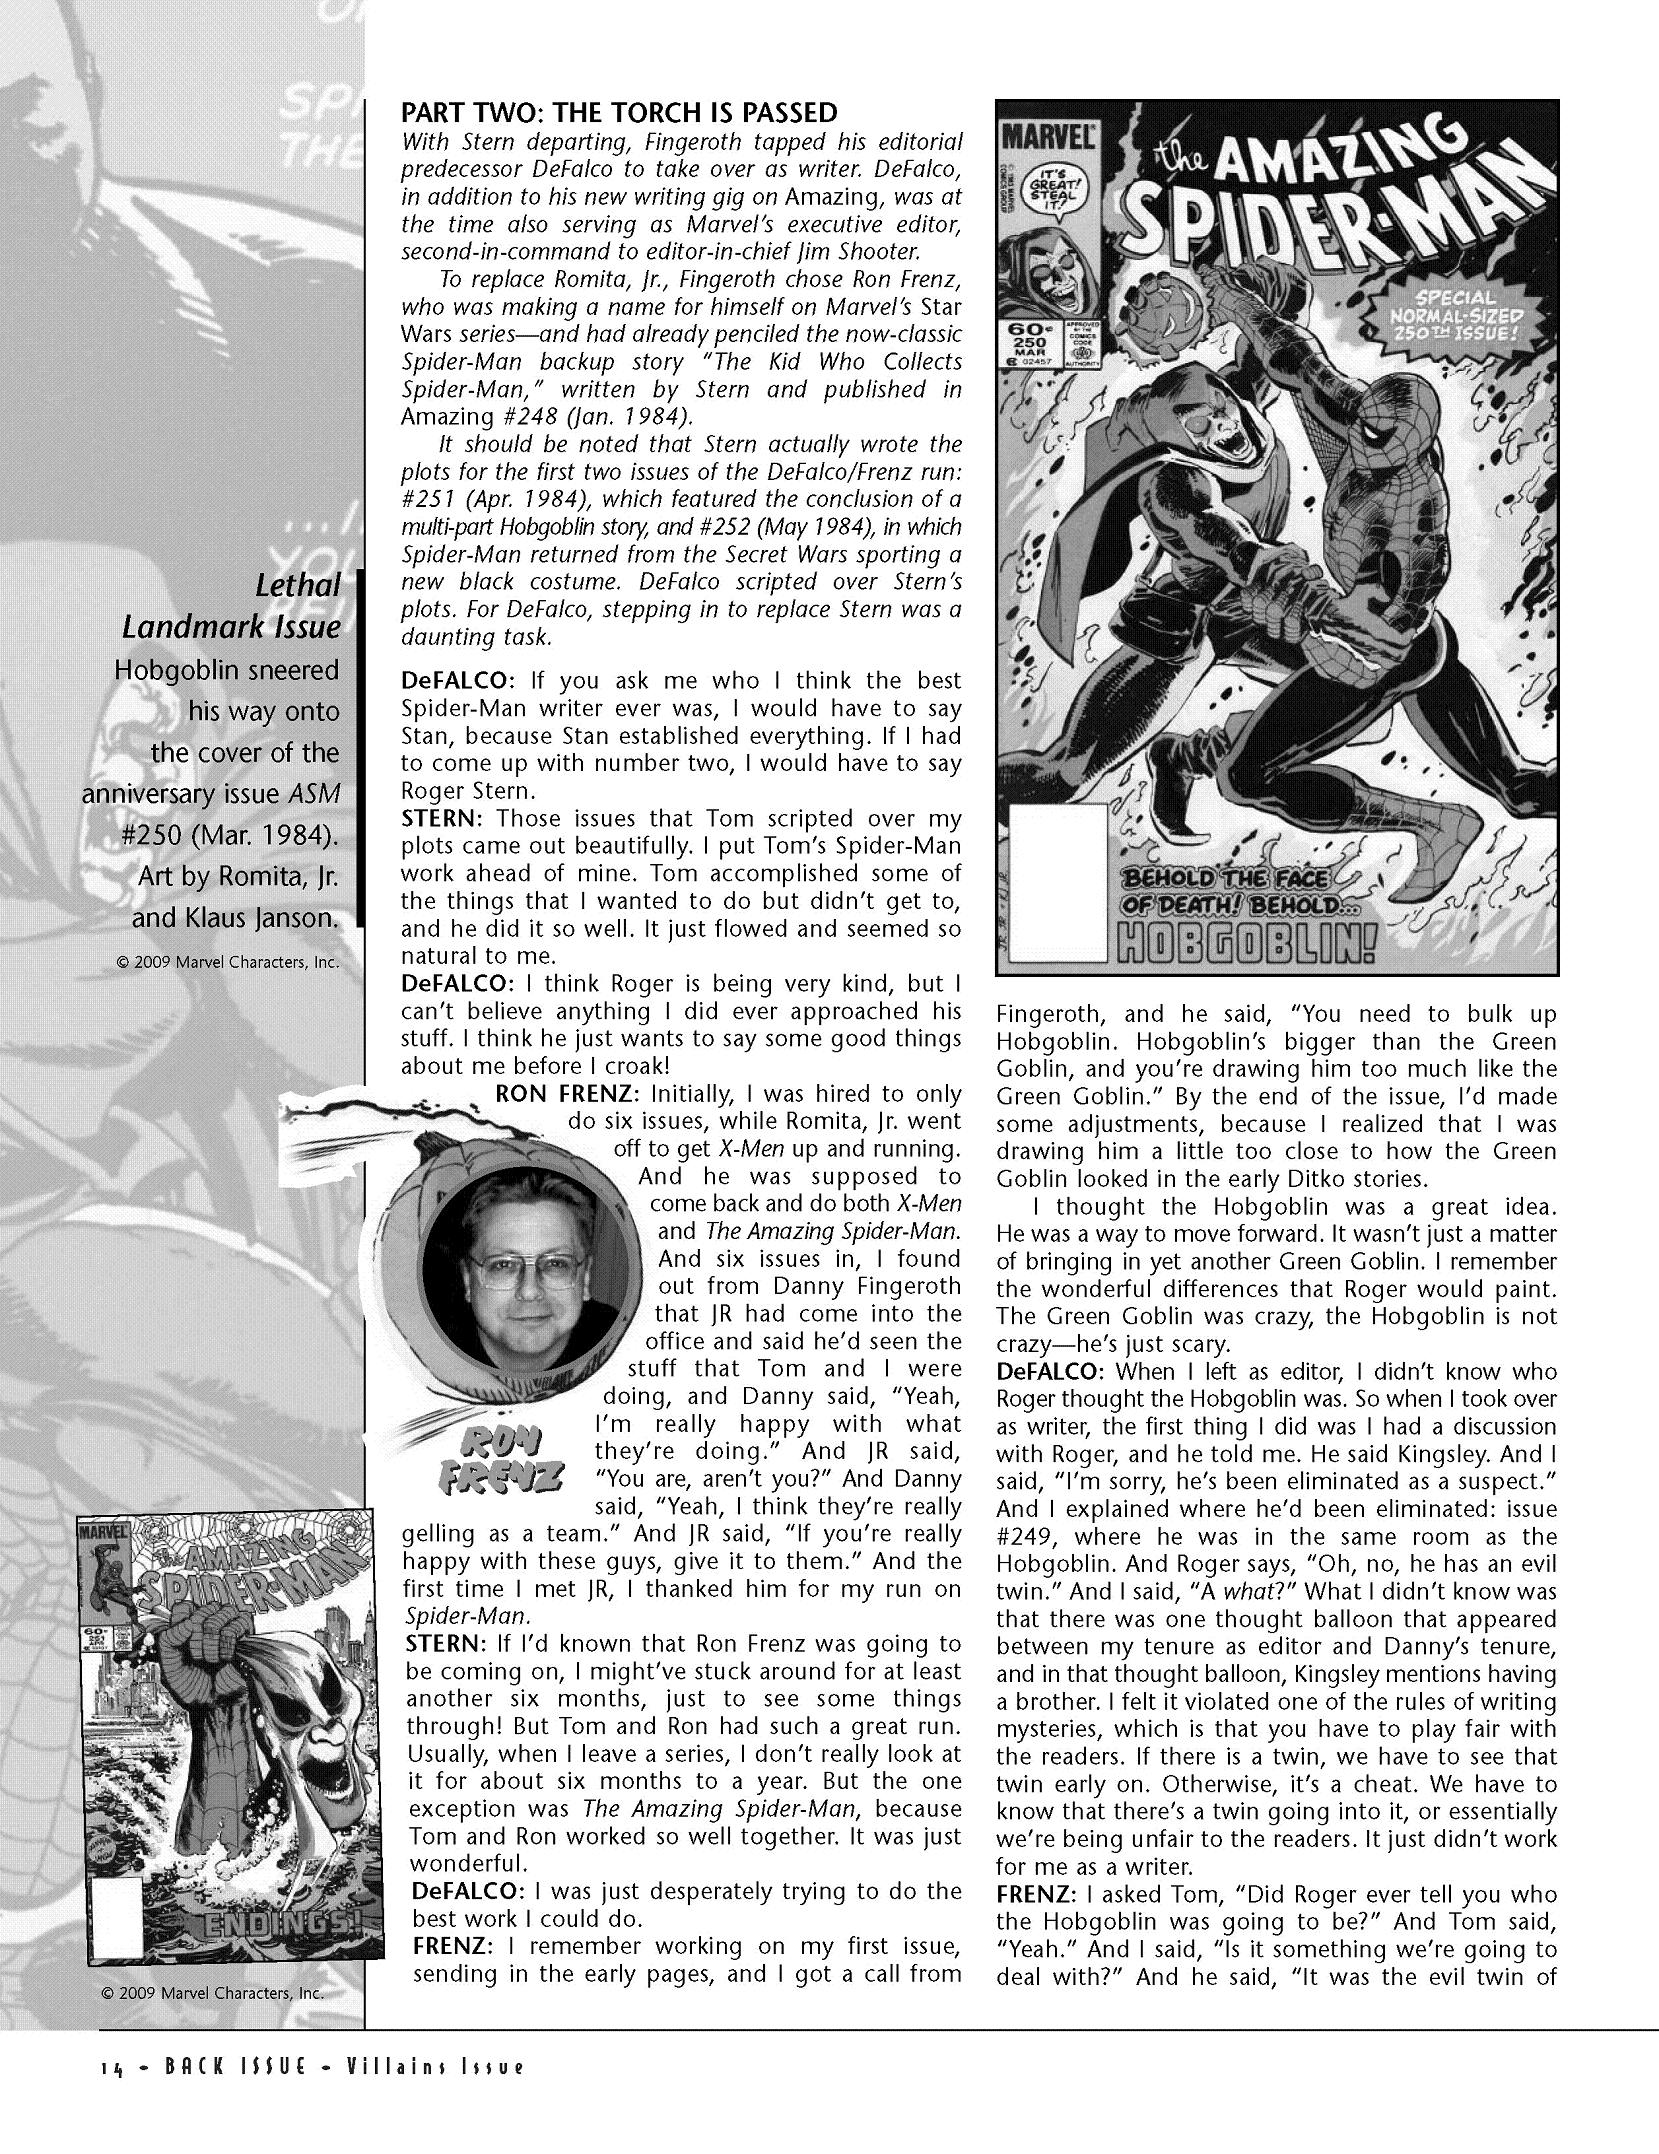 Read online Back Issue comic -  Issue #35 - 16